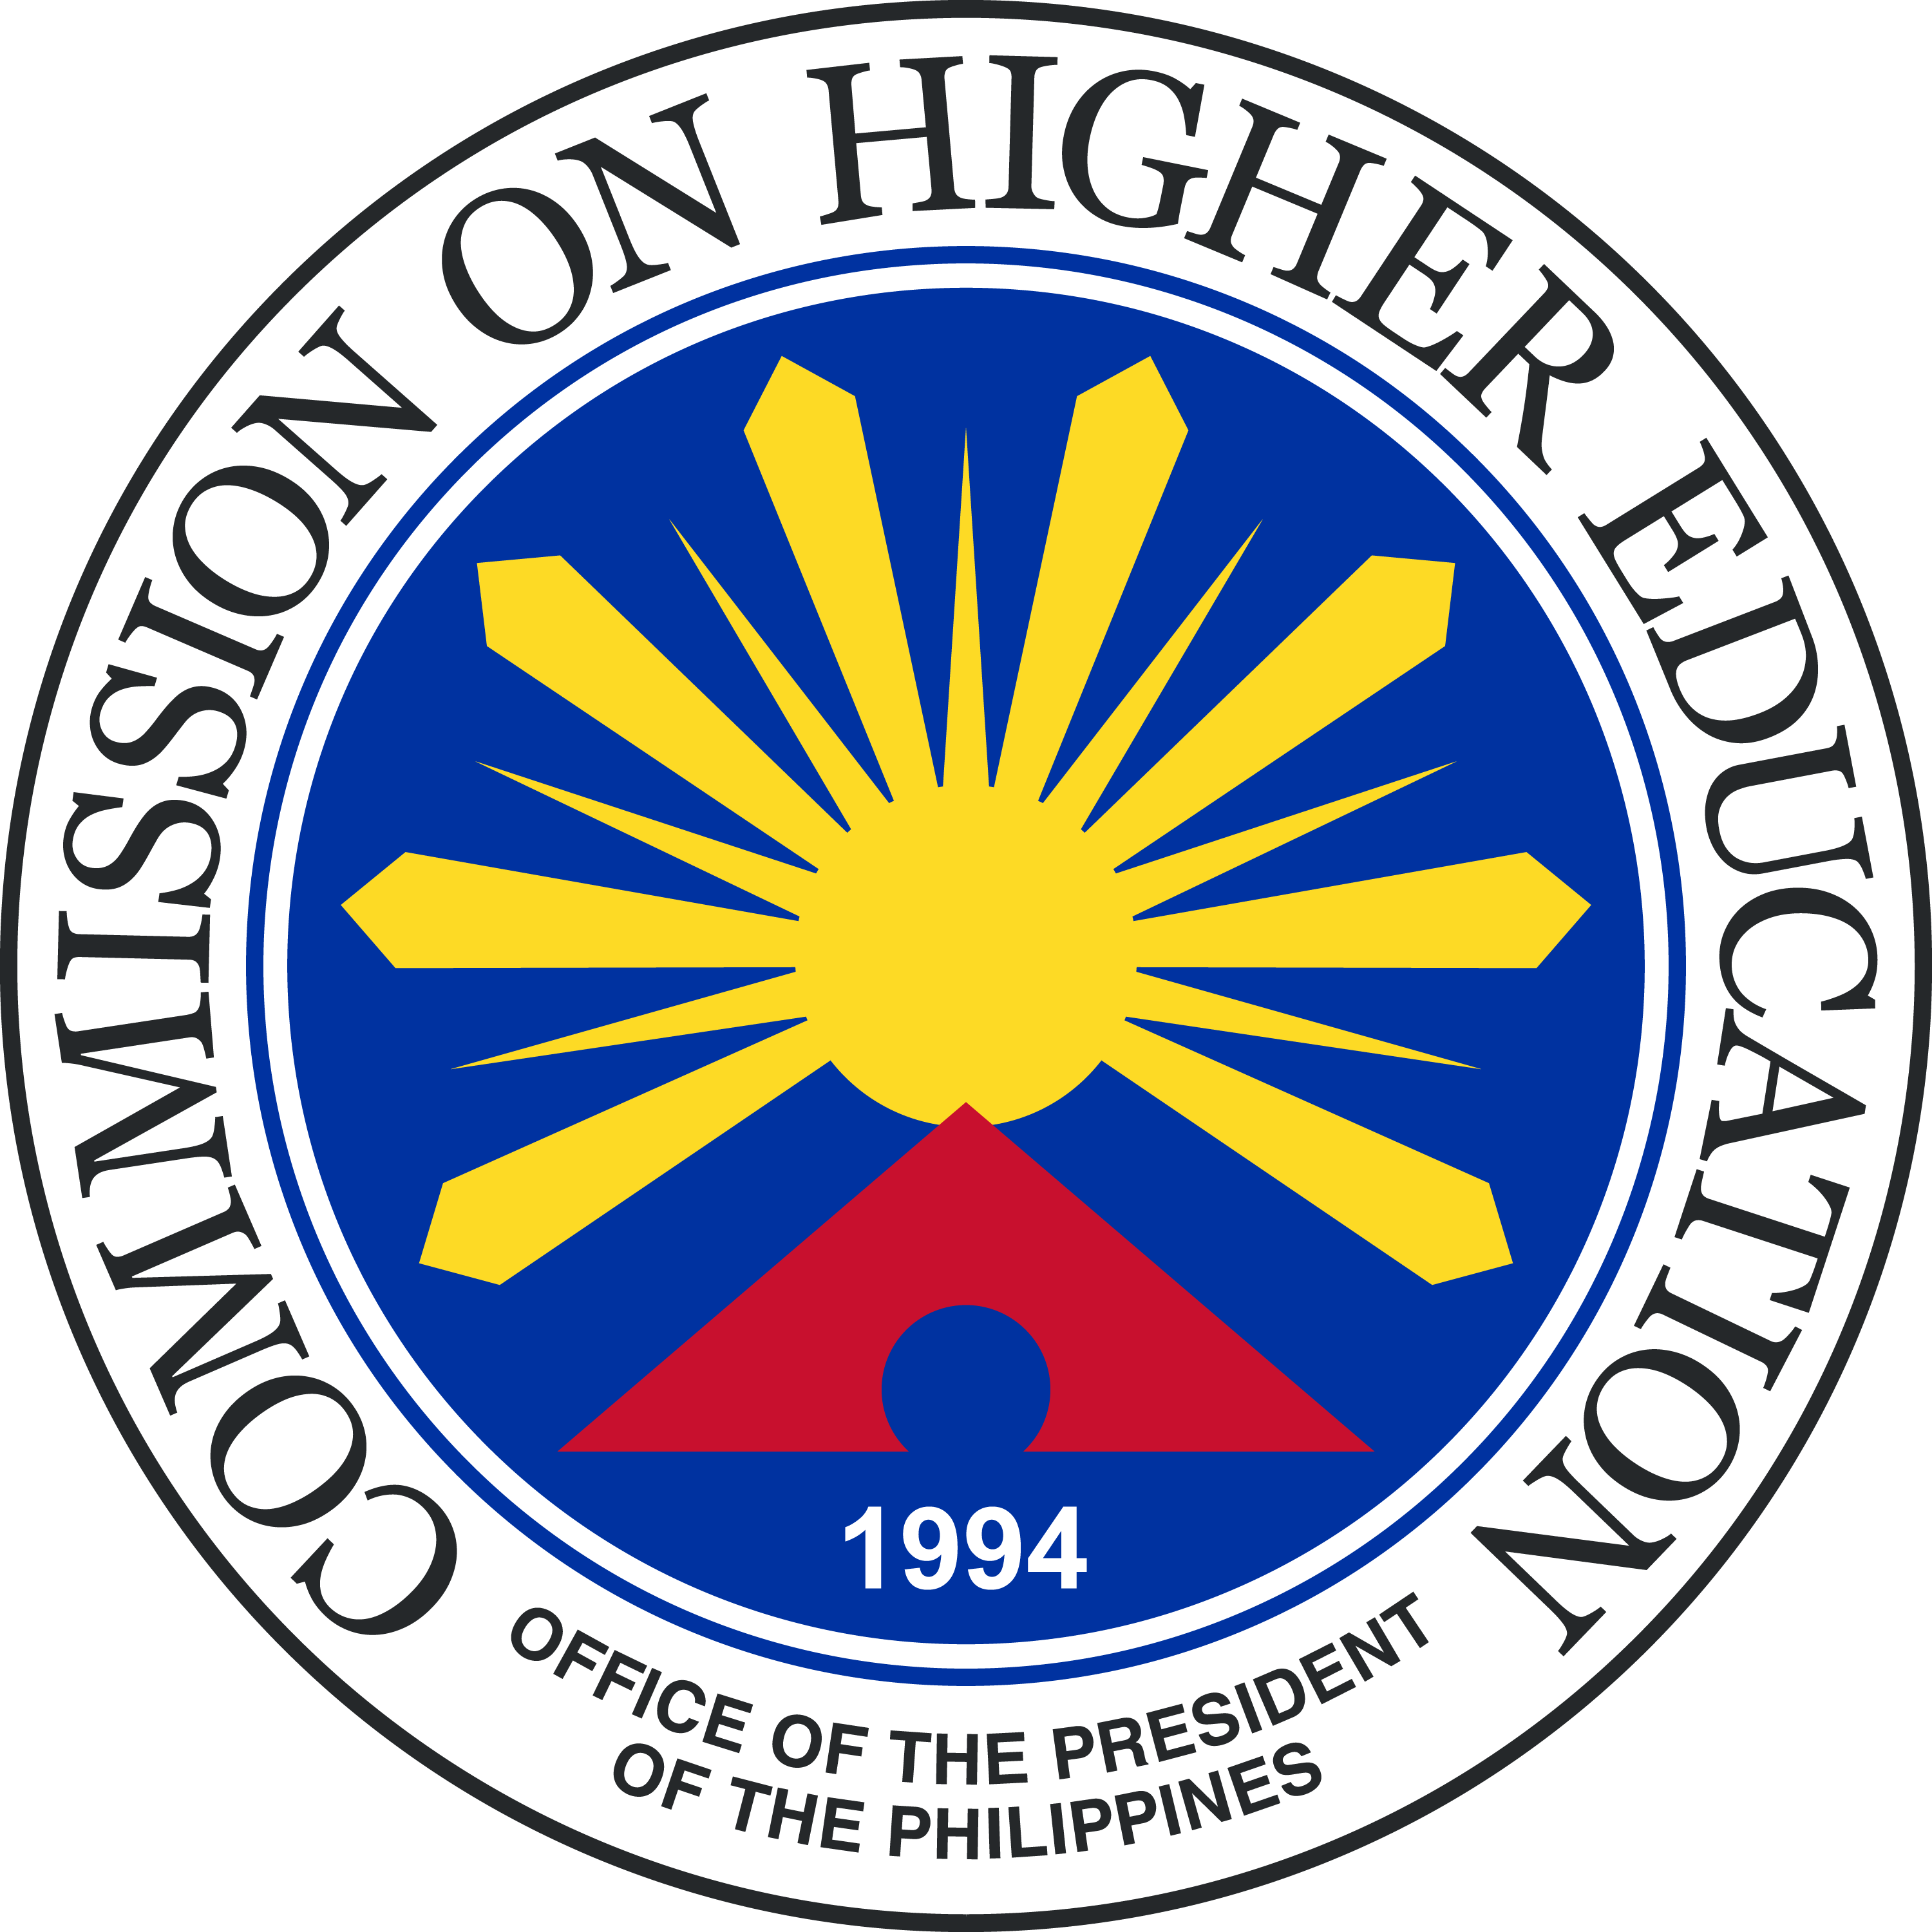 Commission on Higher Education